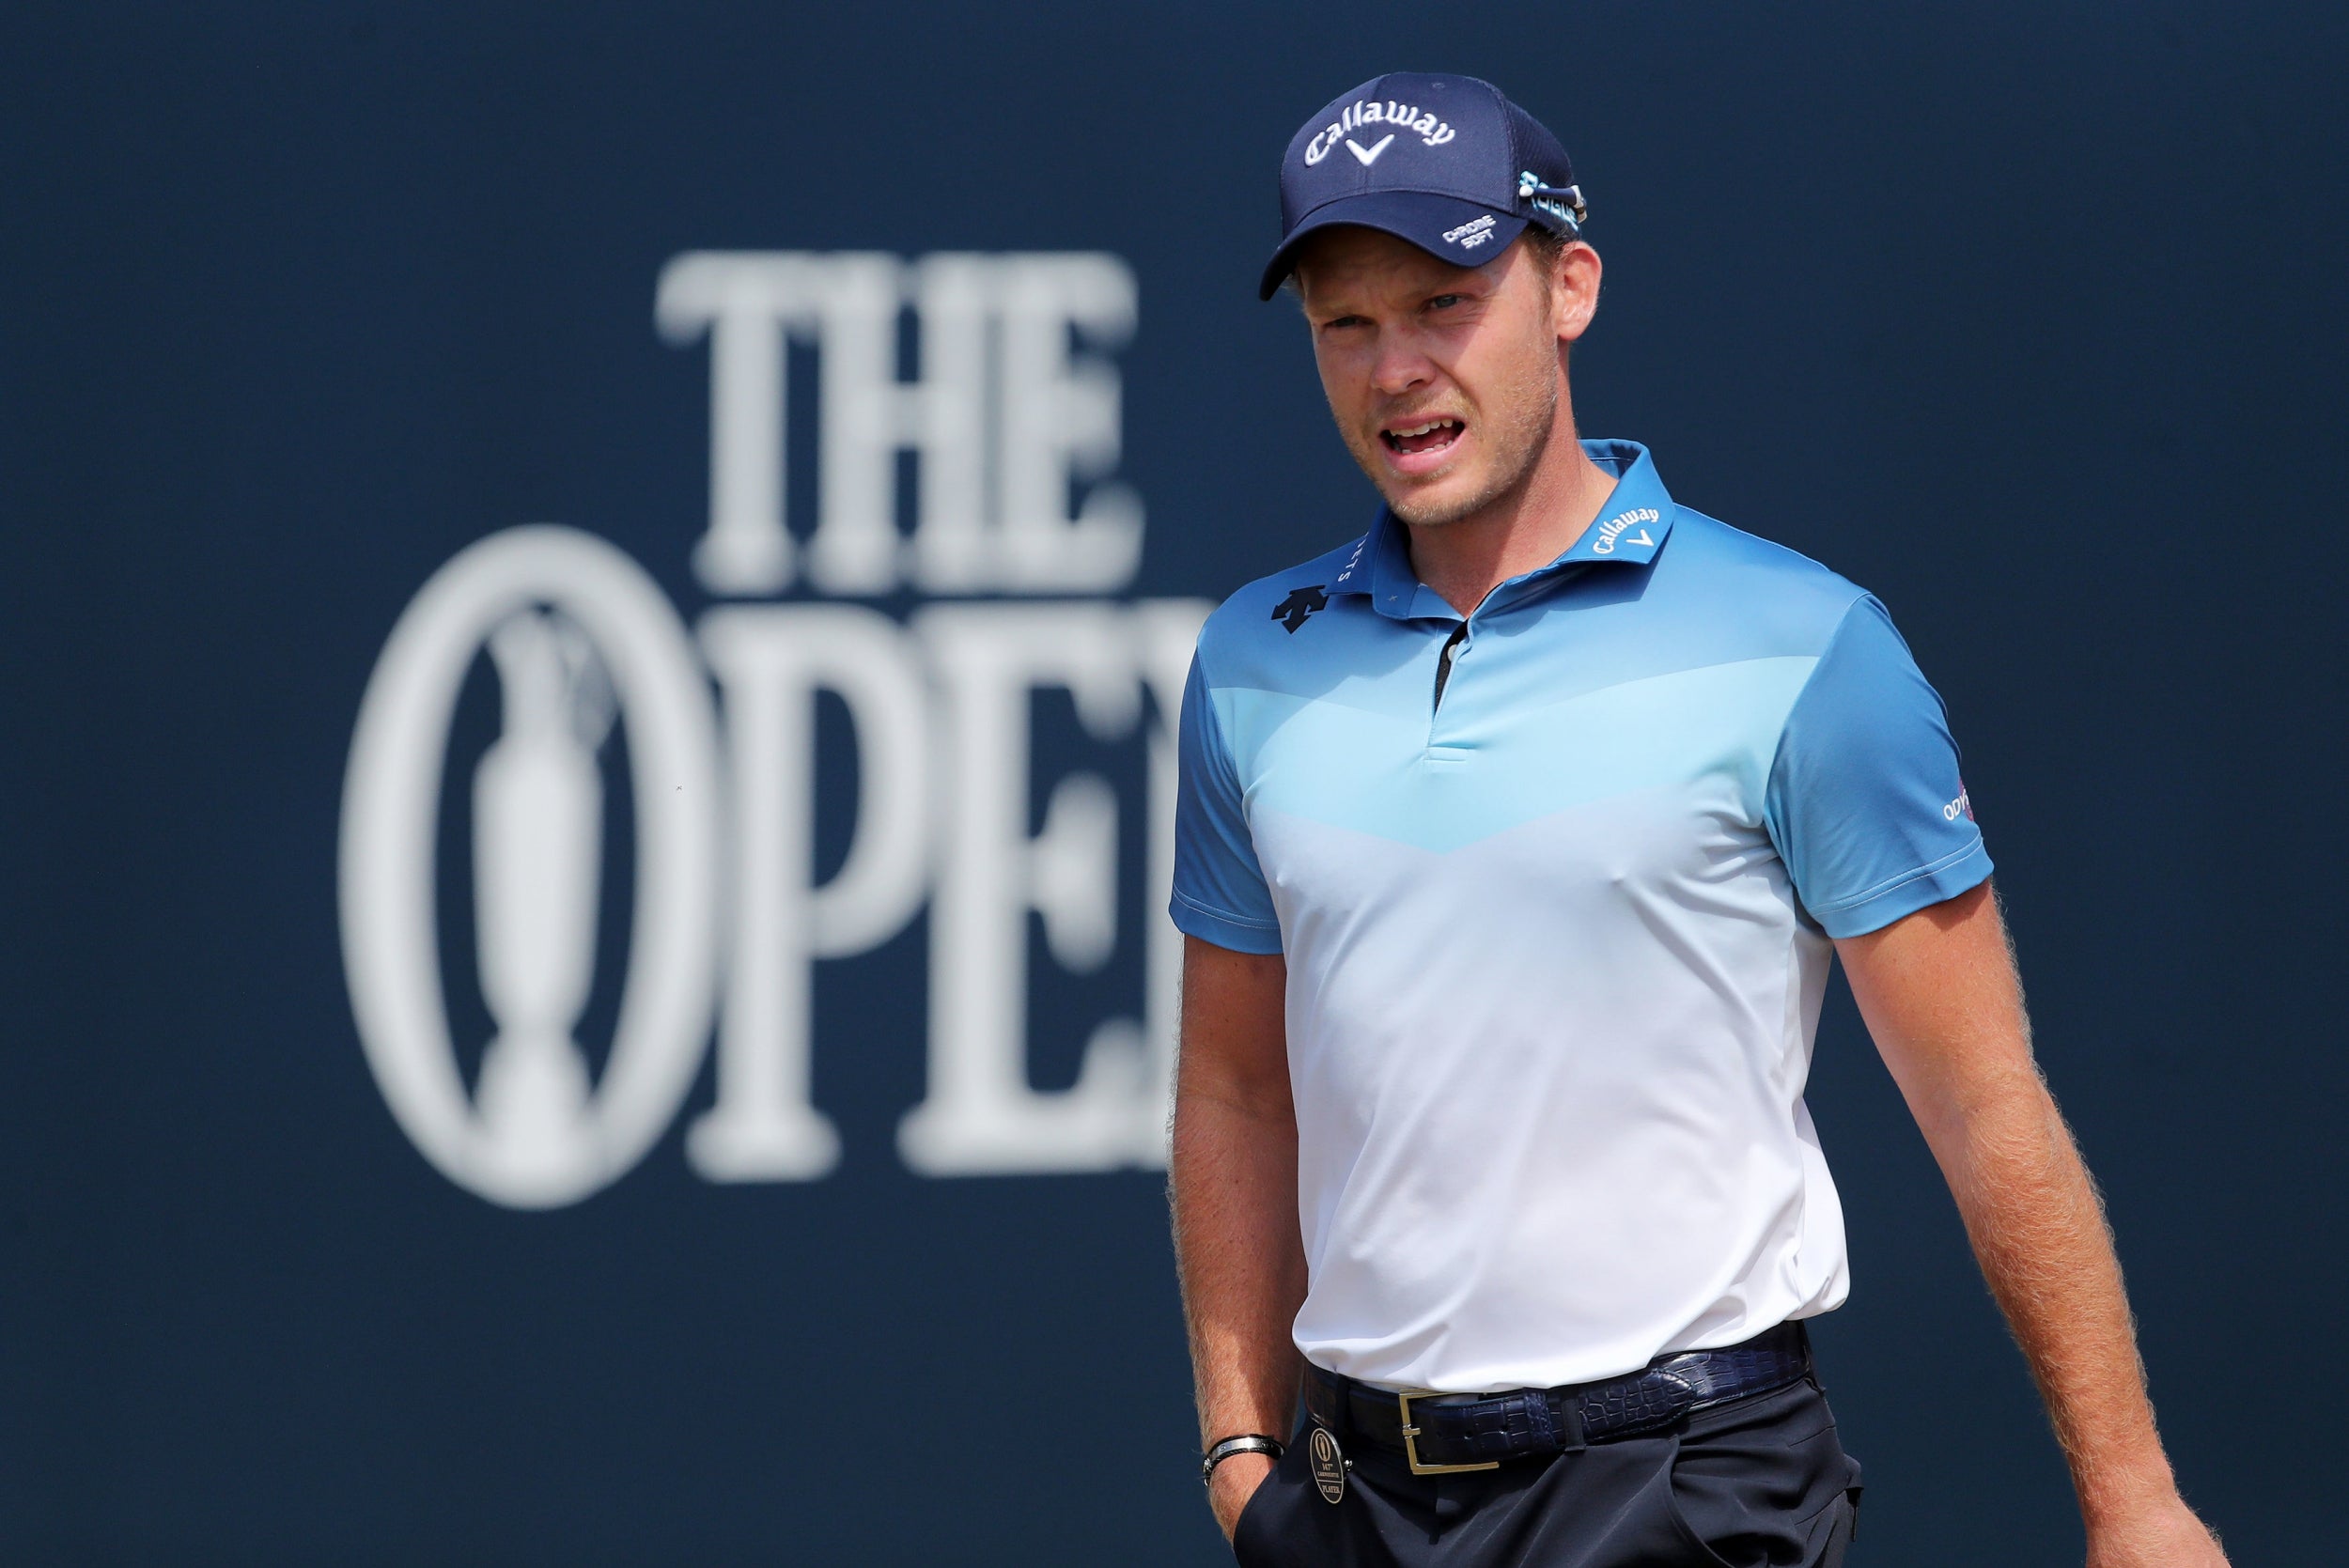 Willett enjoyed a strong outing at Carnoustie